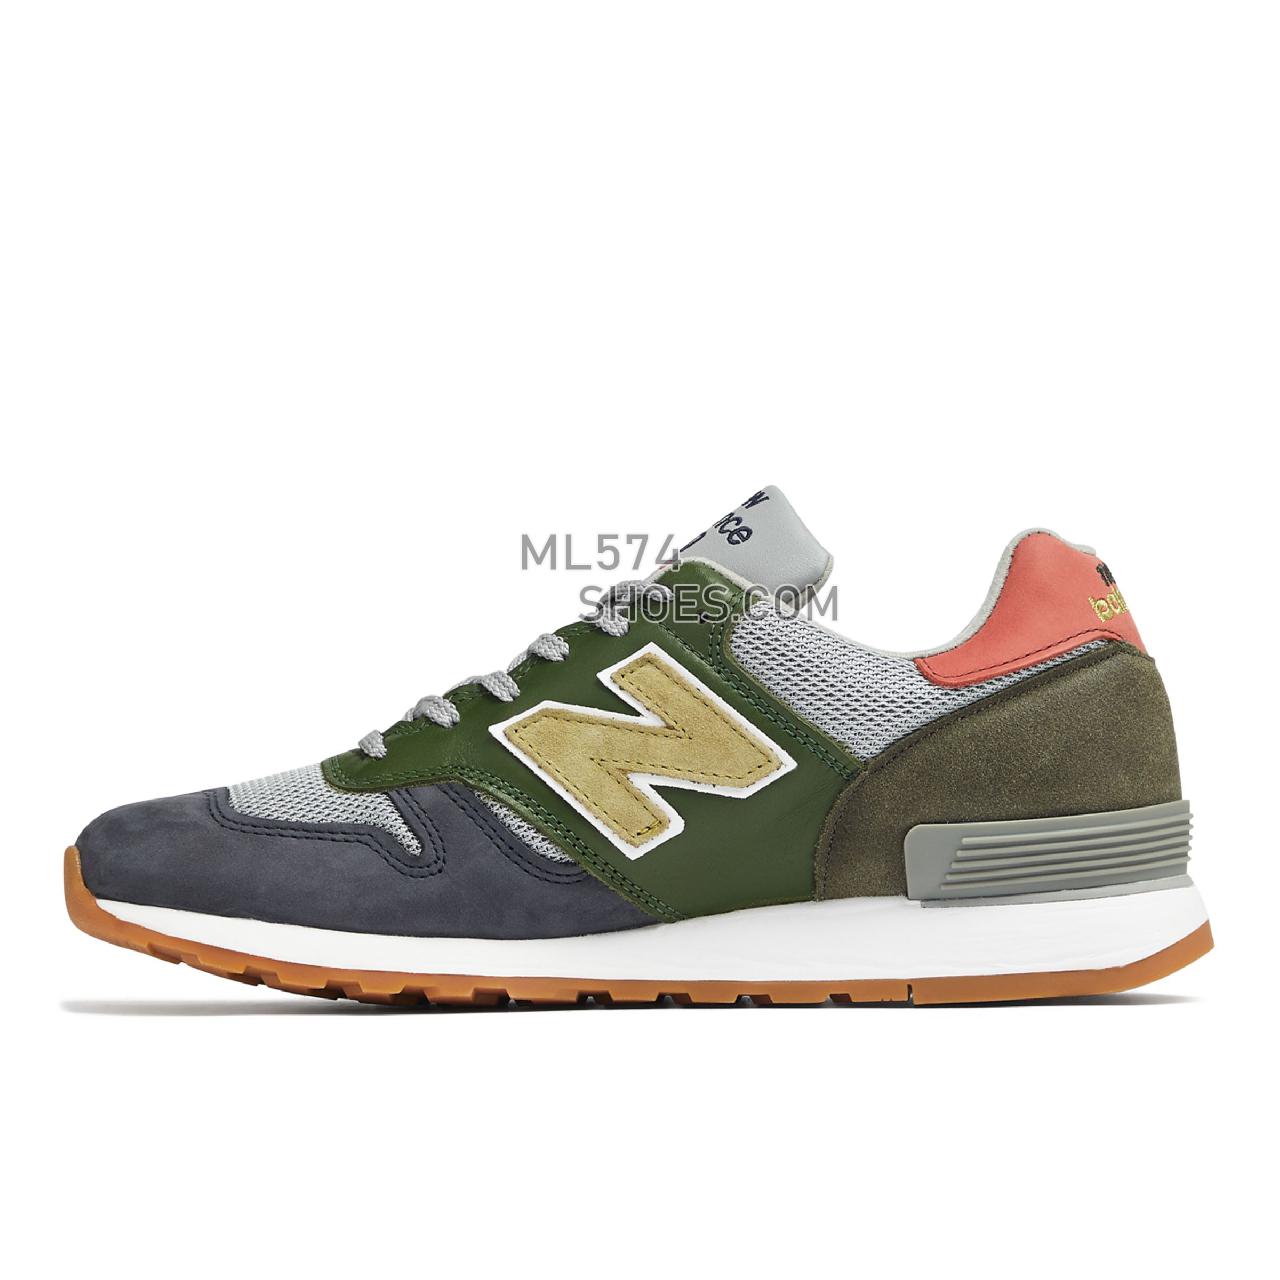 New Balance MADE UK 670 - Men's Made in USA And UK Sneakers - Green with Grey and Pink - M670SPK